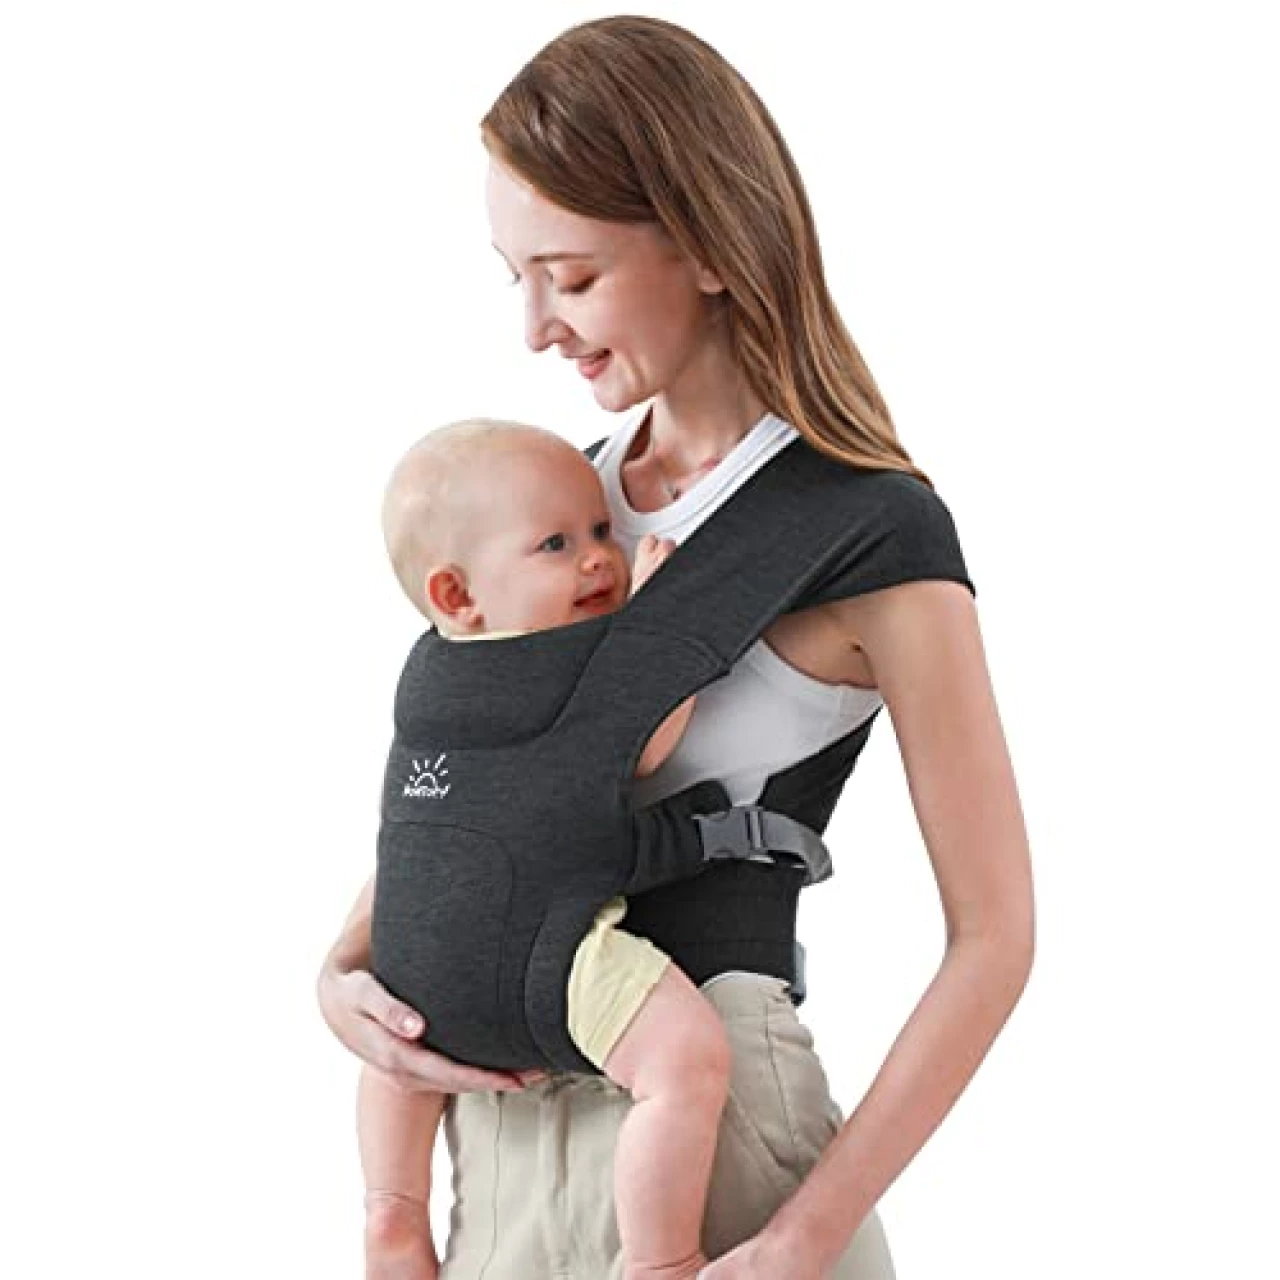 MOMTORY Newborn Carrier, Baby Carrier(7-25lbs), Cozy Baby Wrap Carrier, with Hook&amp;Loop for Easily Adjustable, Soft Fabric, Deep Grey